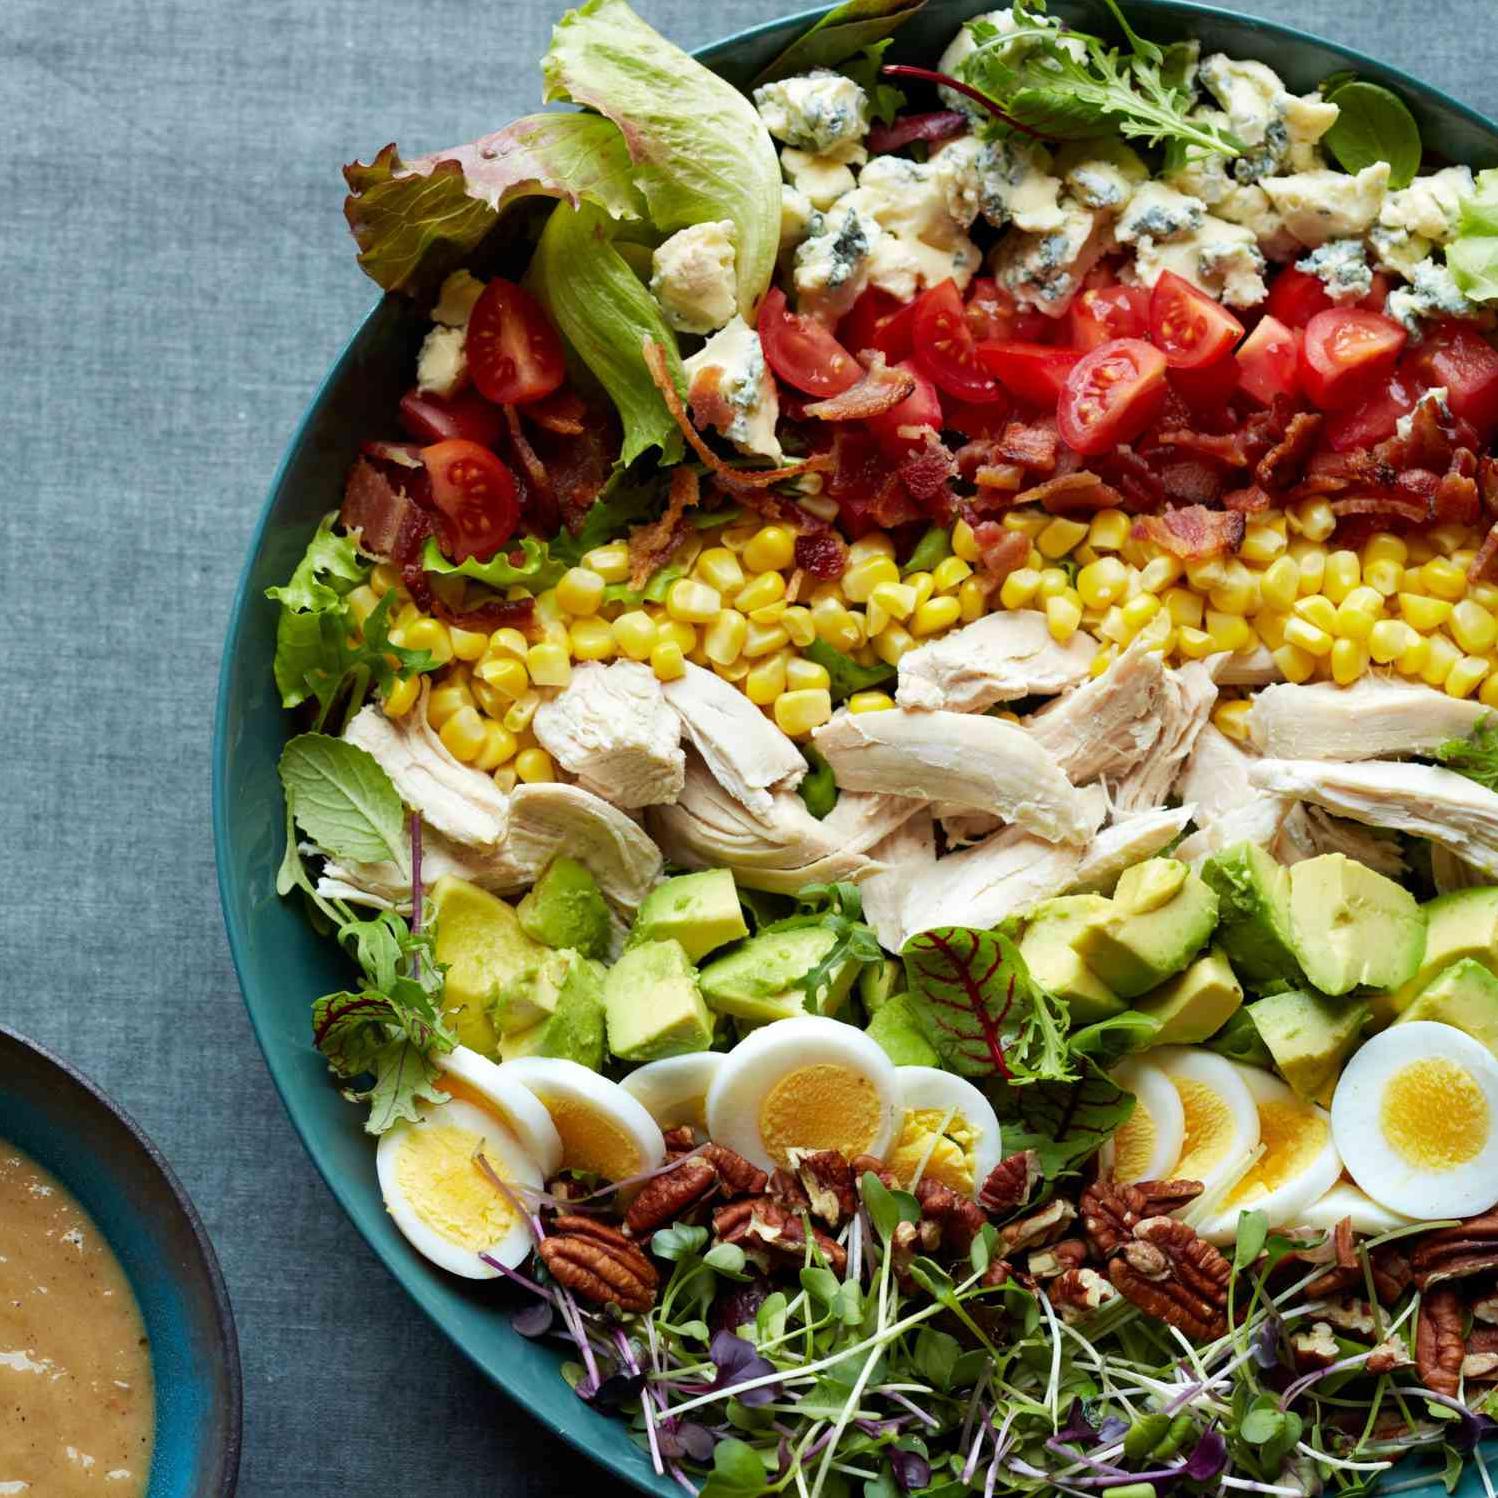  Get ready to take a trip to the South with every bite of this delicious salad.